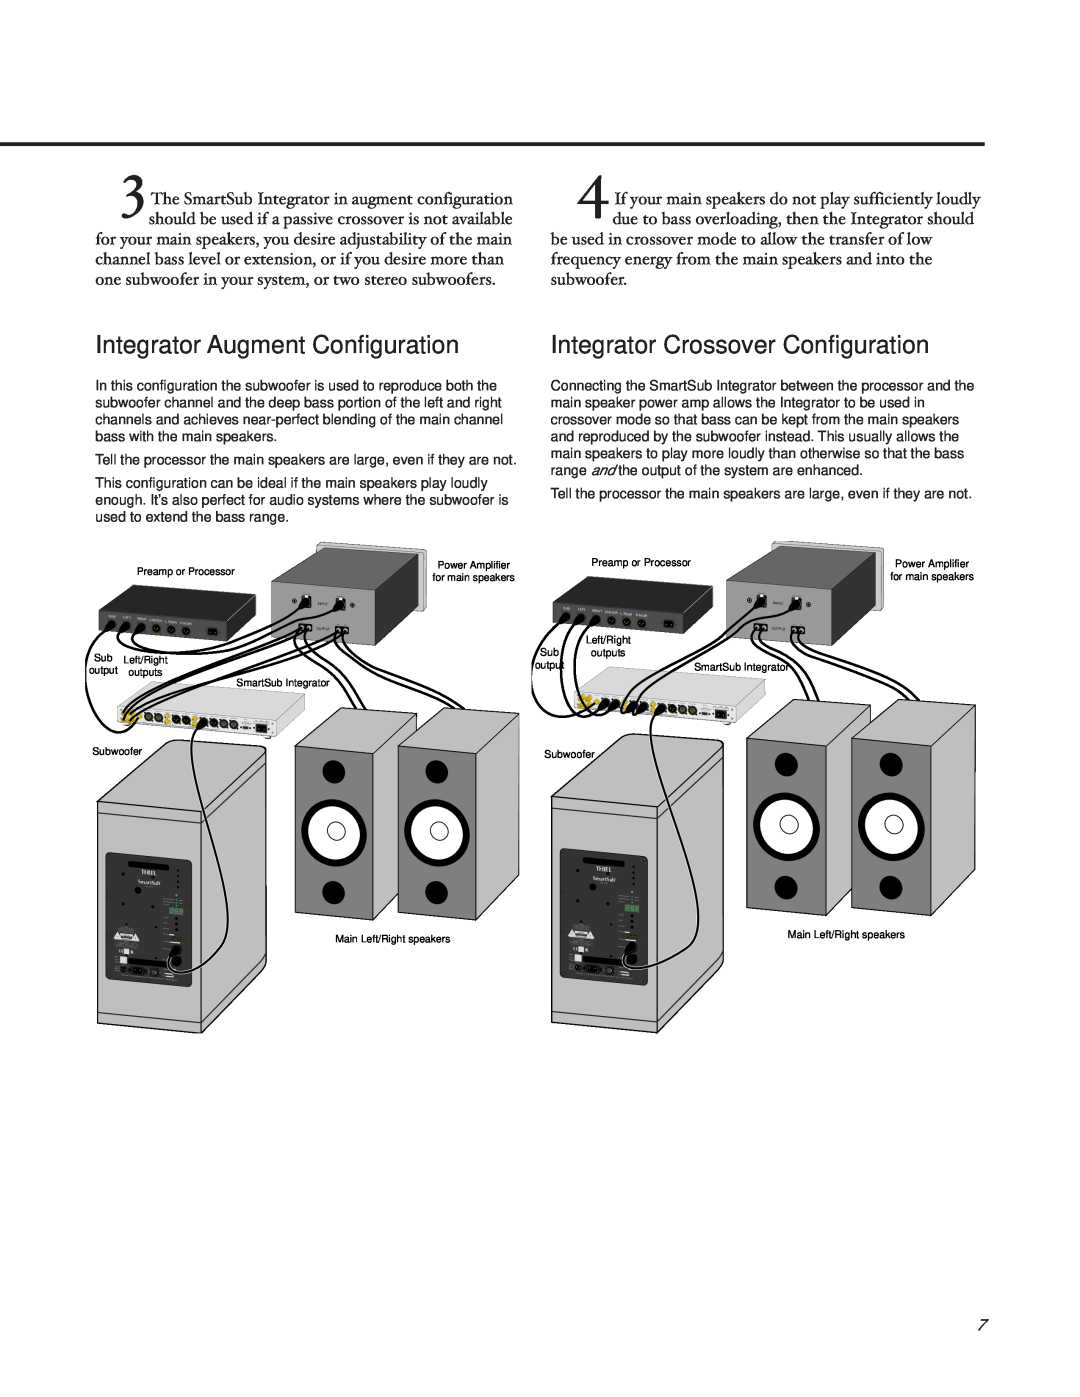 Thiel Audio Products SW1, SS4, SS3 manual Integrator Augment Configuration, Integrator Crossover Configuration 